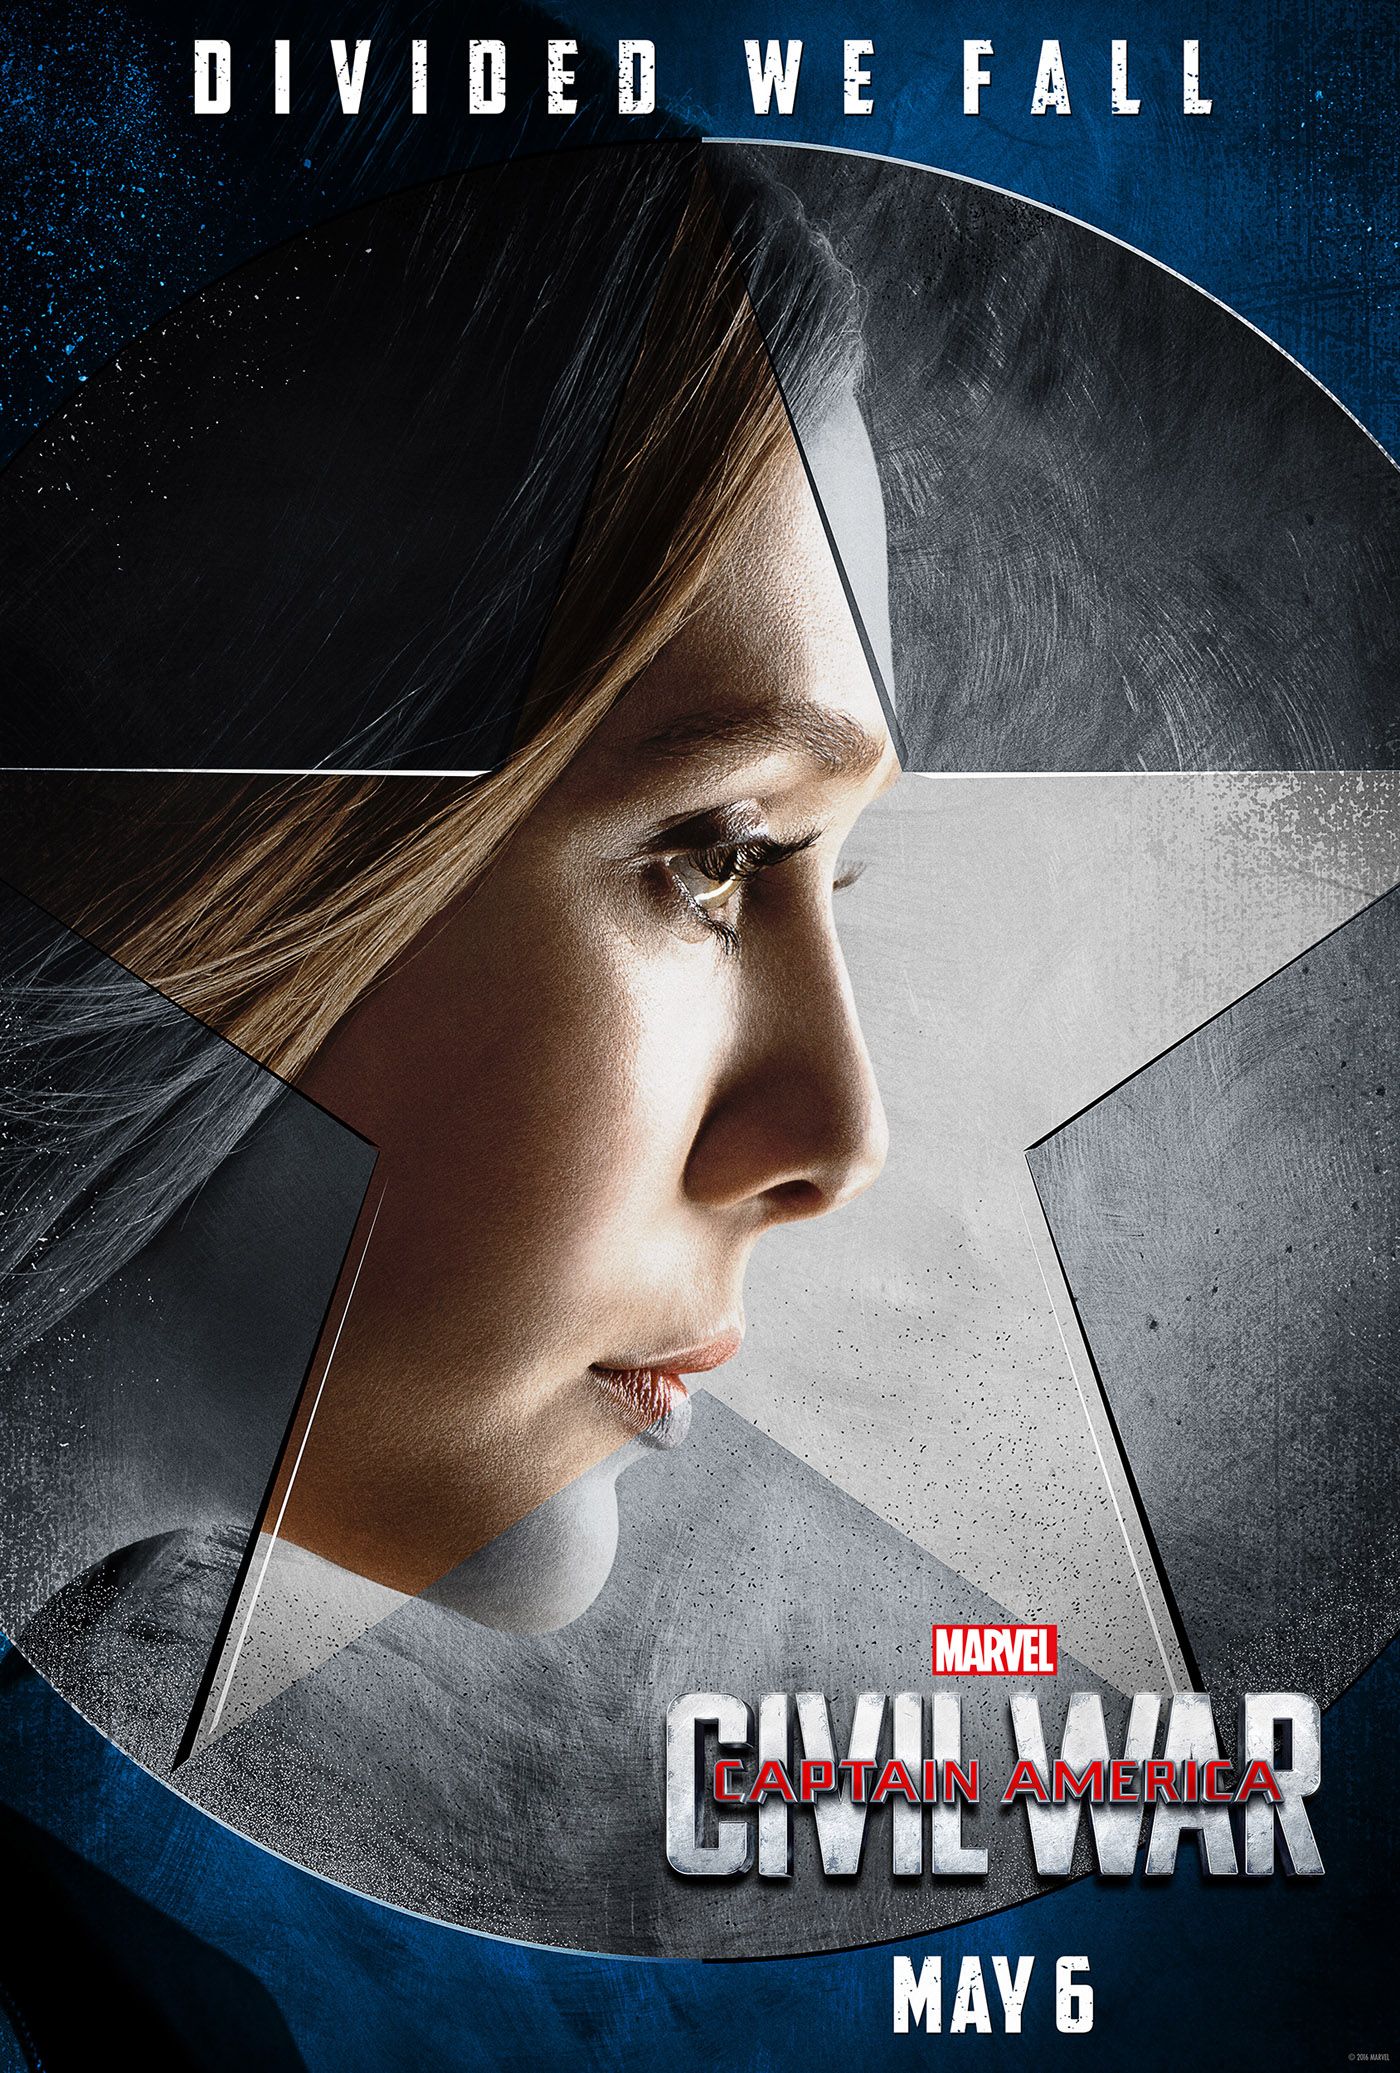 Captain America: Civil War Character Poster - Scarlet Witch